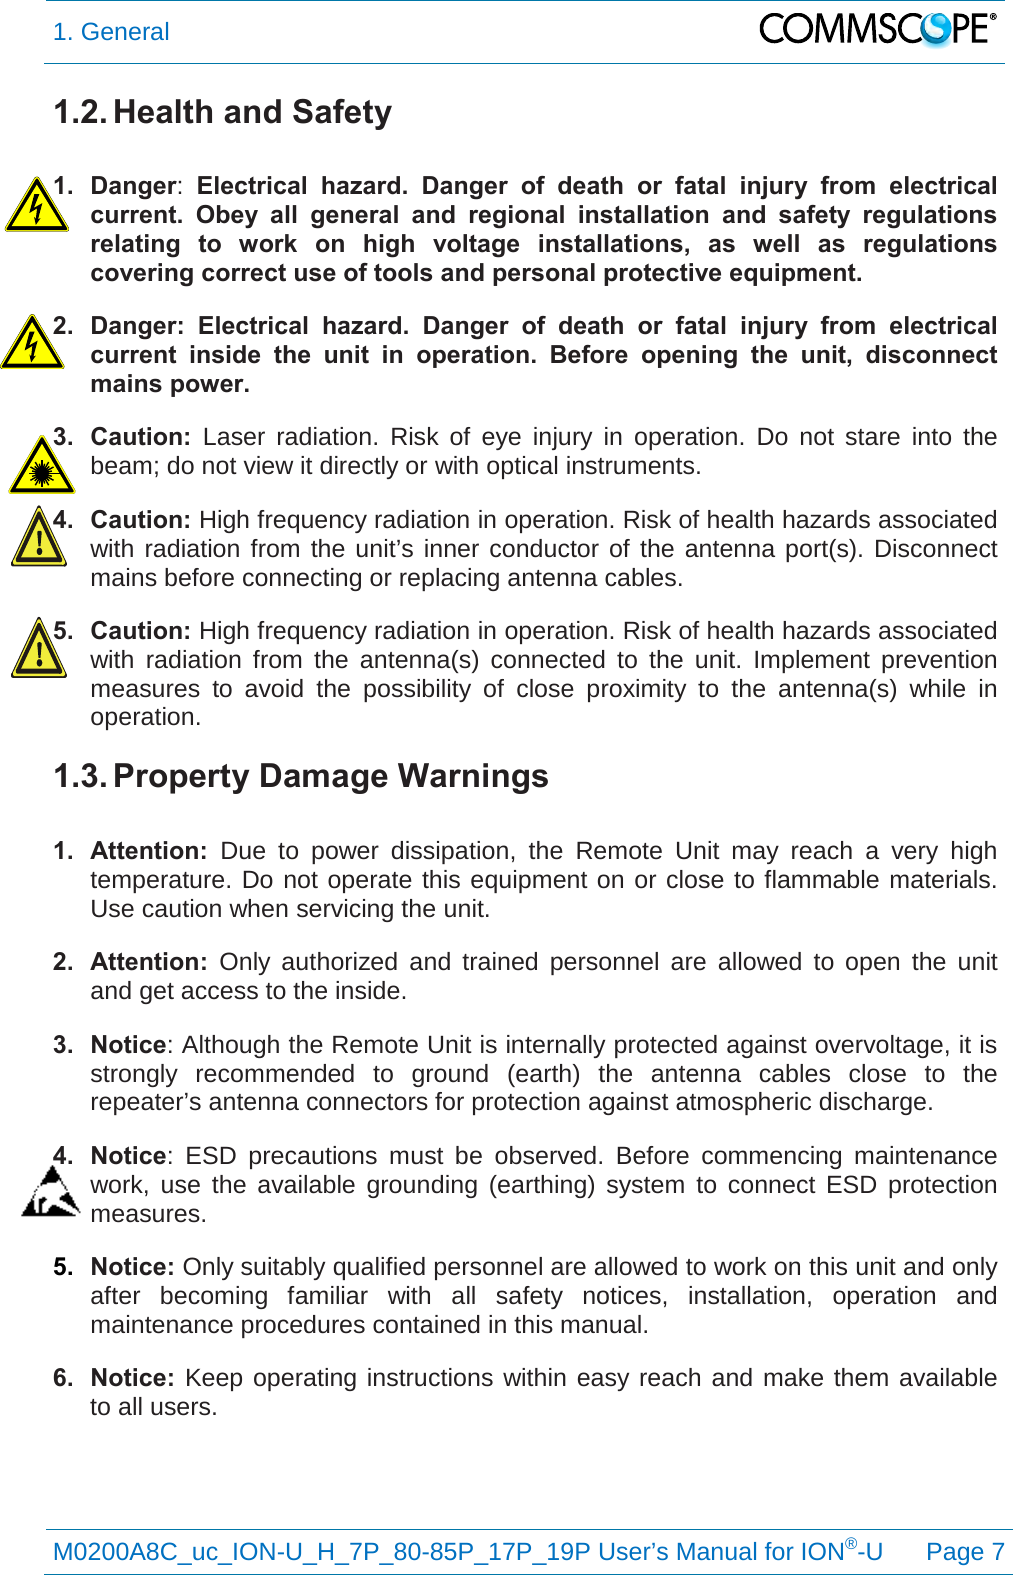 1. General   M0200A8C_uc_ION-U_H_7P_80-85P_17P_19P User’s Manual for ION®-U  Page 7  1.2. Health and Safety  1. Danger:  Electrical hazard. Danger of death or fatal injury from electrical current. Obey all general and regional installation and safety regulations relating to work on high voltage installations, as well as regulations covering correct use of tools and personal protective equipment. 2. Danger:  Electrical hazard. Danger of death or fatal injury from electrical current inside the unit in operation.  Before opening the unit, disconnect mains power. 3. Caution:  Laser radiation. Risk of eye injury in operation. Do not stare into the beam; do not view it directly or with optical instruments. 4. Caution: High frequency radiation in operation. Risk of health hazards associated with radiation from the unit’s inner conductor of the antenna port(s). Disconnect mains before connecting or replacing antenna cables. 5. Caution: High frequency radiation in operation. Risk of health hazards associated with radiation from the antenna(s) connected to the unit. Implement prevention measures to avoid the possibility of close proximity to the antenna(s) while in operation. 1.3. Property Damage Warnings  1. Attention:  Due to power dissipation, the Remote Unit may reach a very high temperature. Do not operate this equipment on or close to flammable materials. Use caution when servicing the unit. 2. Attention: Only authorized and trained personnel are allowed to open the unit and get access to the inside. 3. Notice: Although the Remote Unit is internally protected against overvoltage, it is strongly recommended to ground (earth) the antenna cables close to the repeater’s antenna connectors for protection against atmospheric discharge. 4. Notice:  ESD precautions must be observed. Before commencing maintenance work, use the available grounding (earthing) system to connect ESD protection measures. 5. Notice: Only suitably qualified personnel are allowed to work on this unit and only after becoming familiar with all safety notices, installation, operation and maintenance procedures contained in this manual. 6. Notice: Keep operating instructions within easy reach and make them available to all users. 